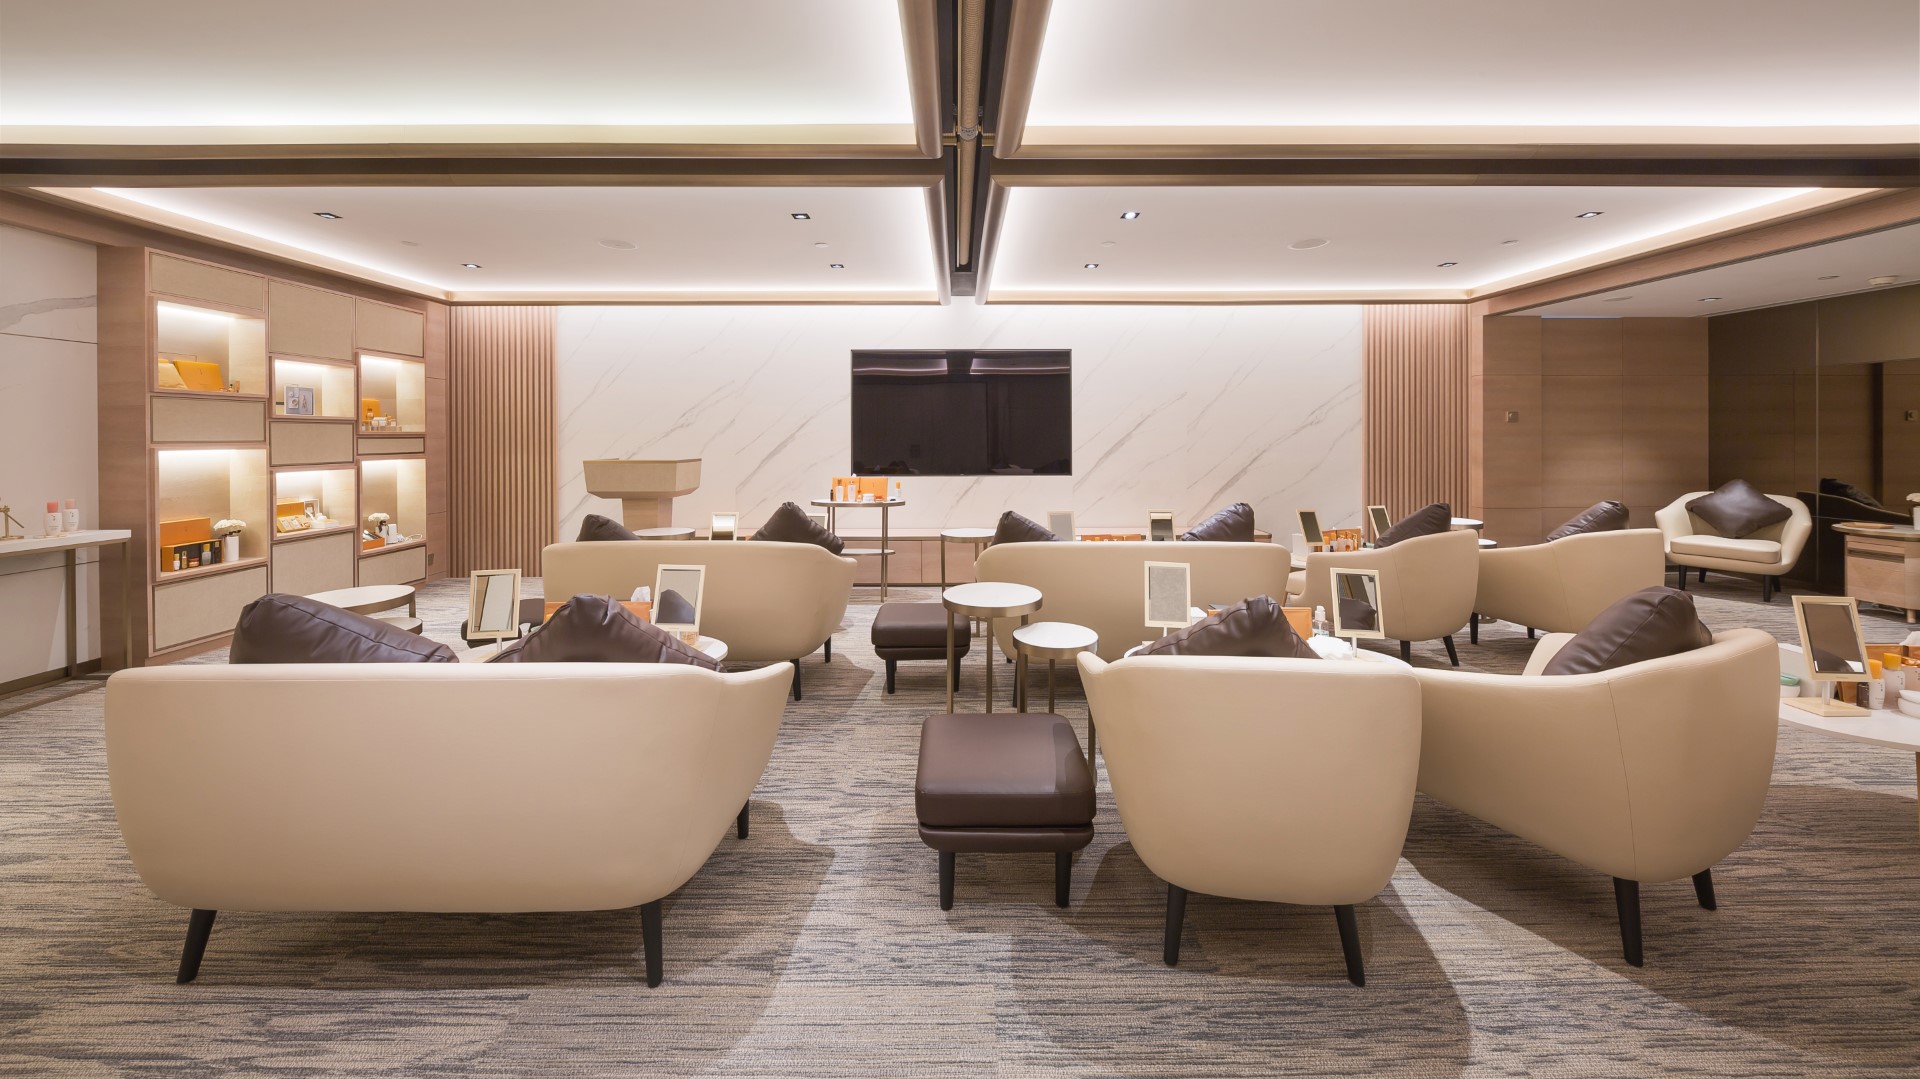 Eric Fung - Once Design Studio Limited - Amorepacific Club Lounge